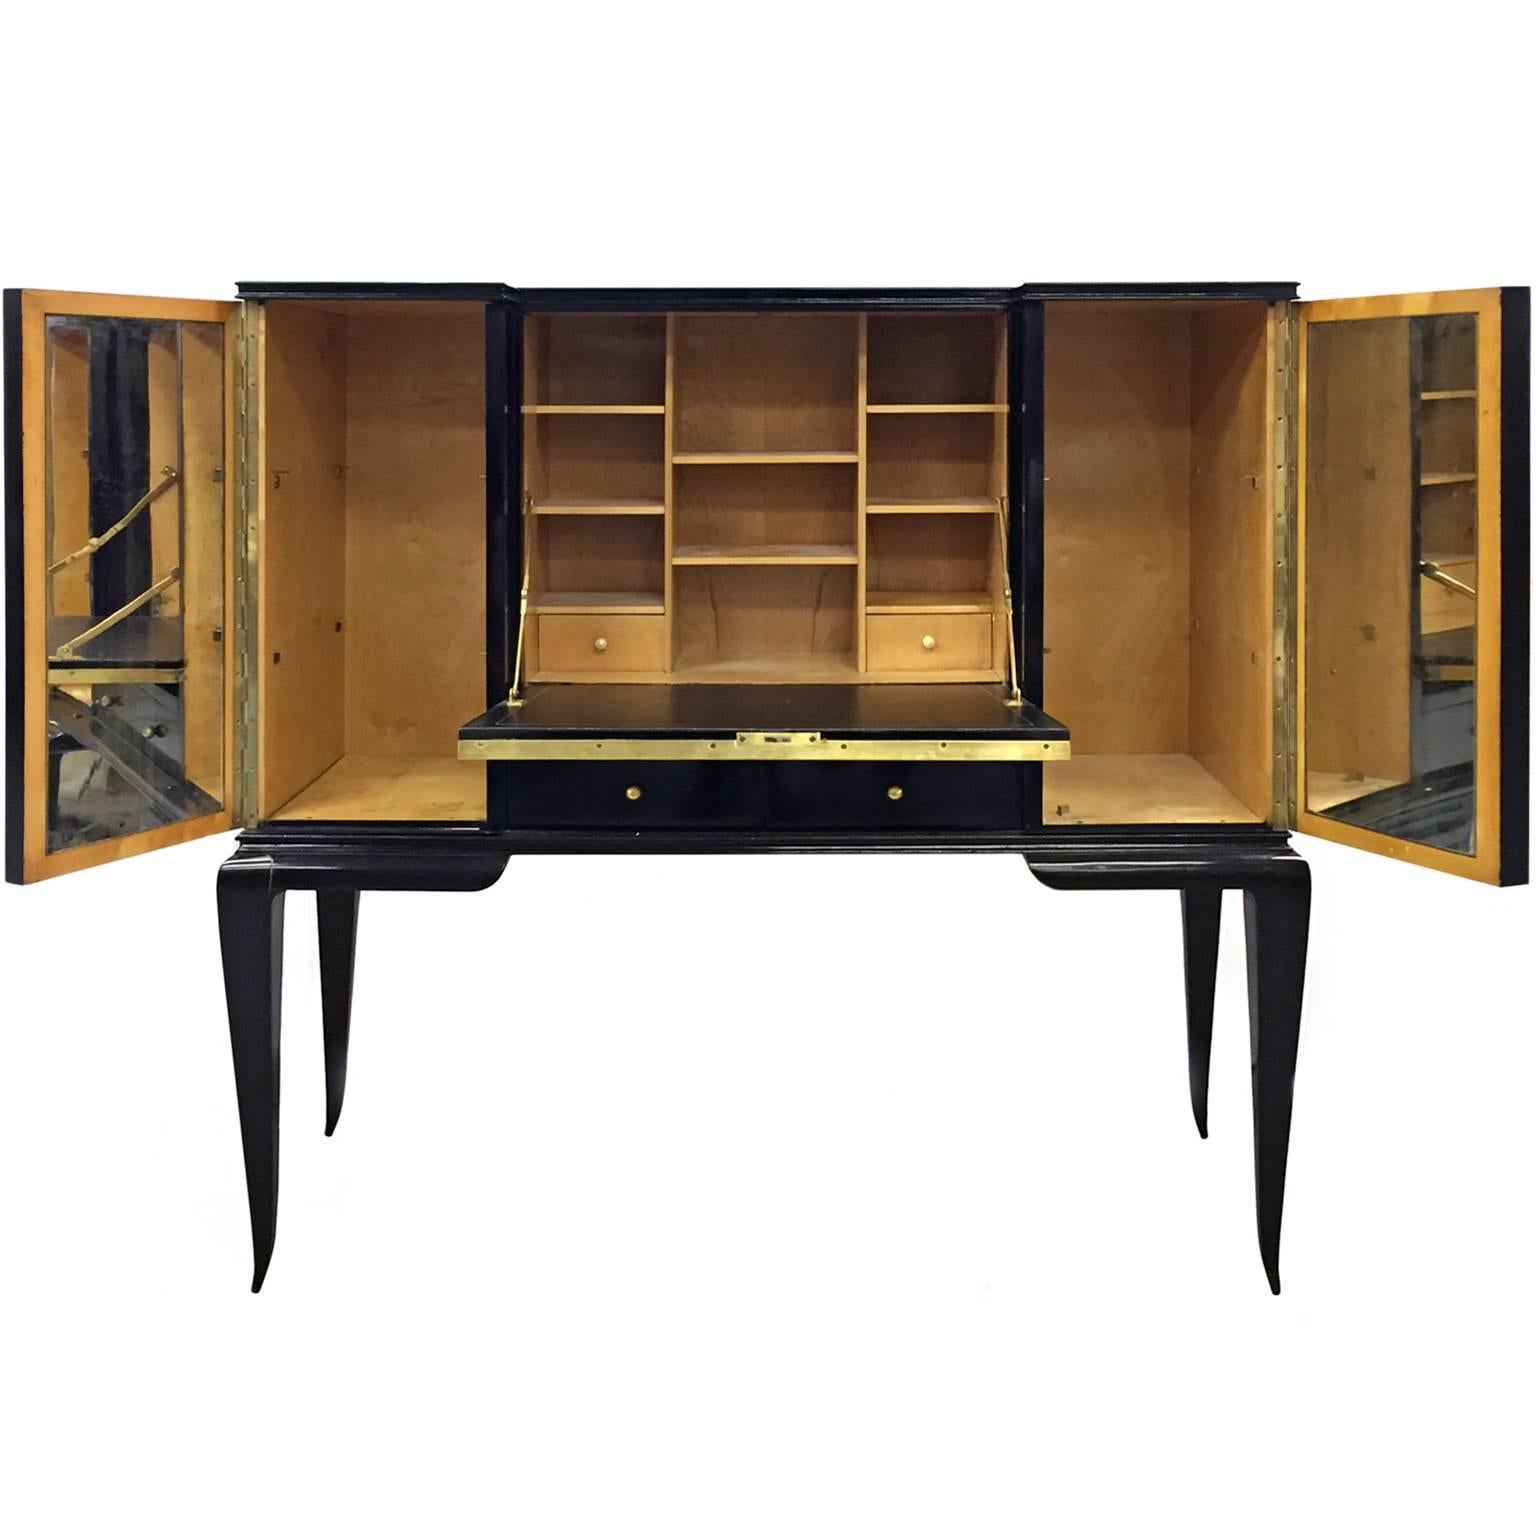 Mid-Century black lacquered wood secretary with central mirrored panel by Decoene. Belgian, 1950s.